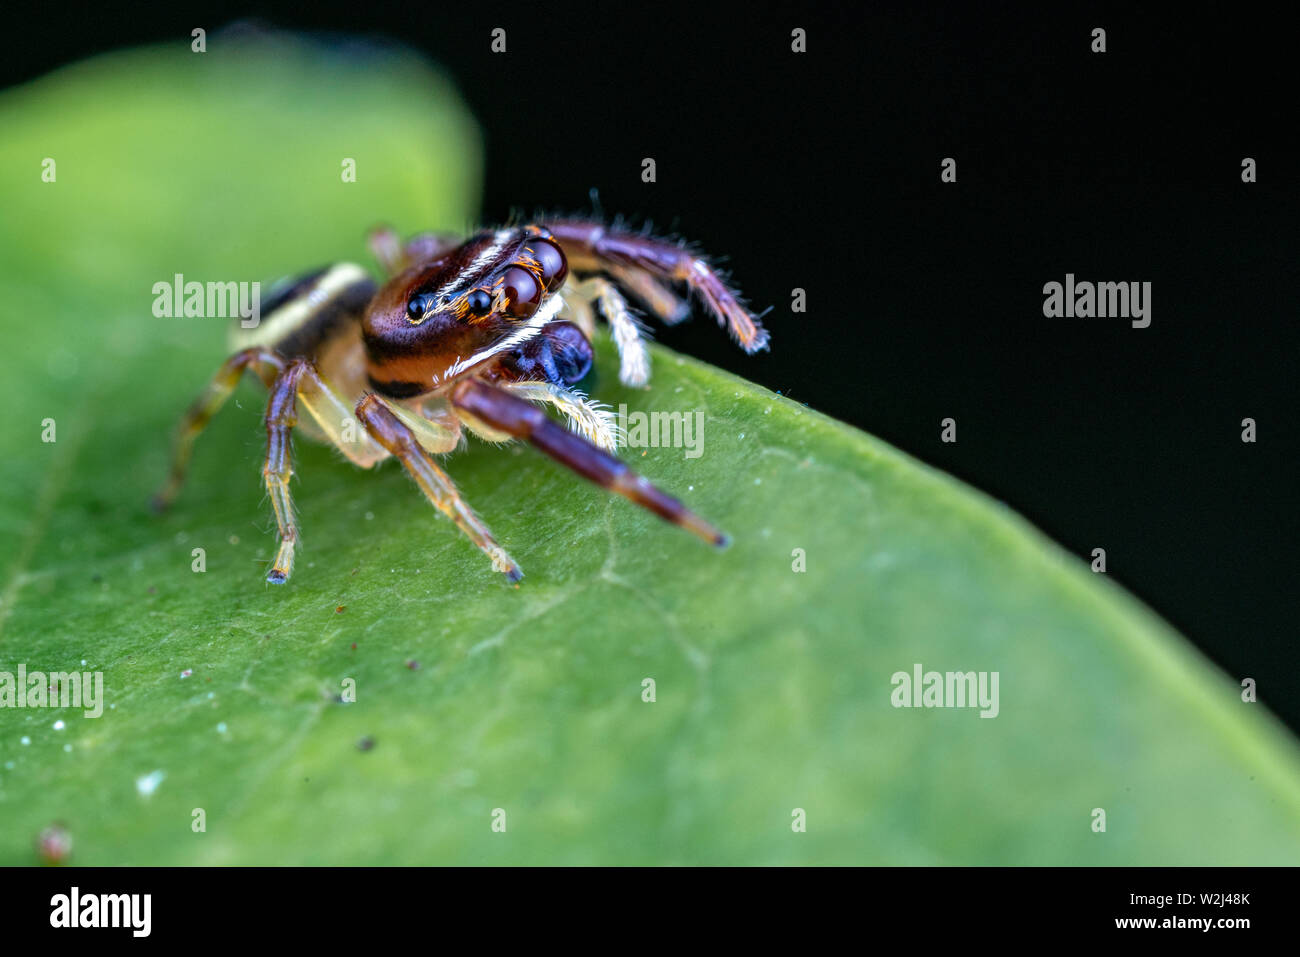 A female Opisthoncus sp. jumping spider - the Northern long-jawed jumper, hunting for prey on a leaf in tropical Queensland Stock Photo